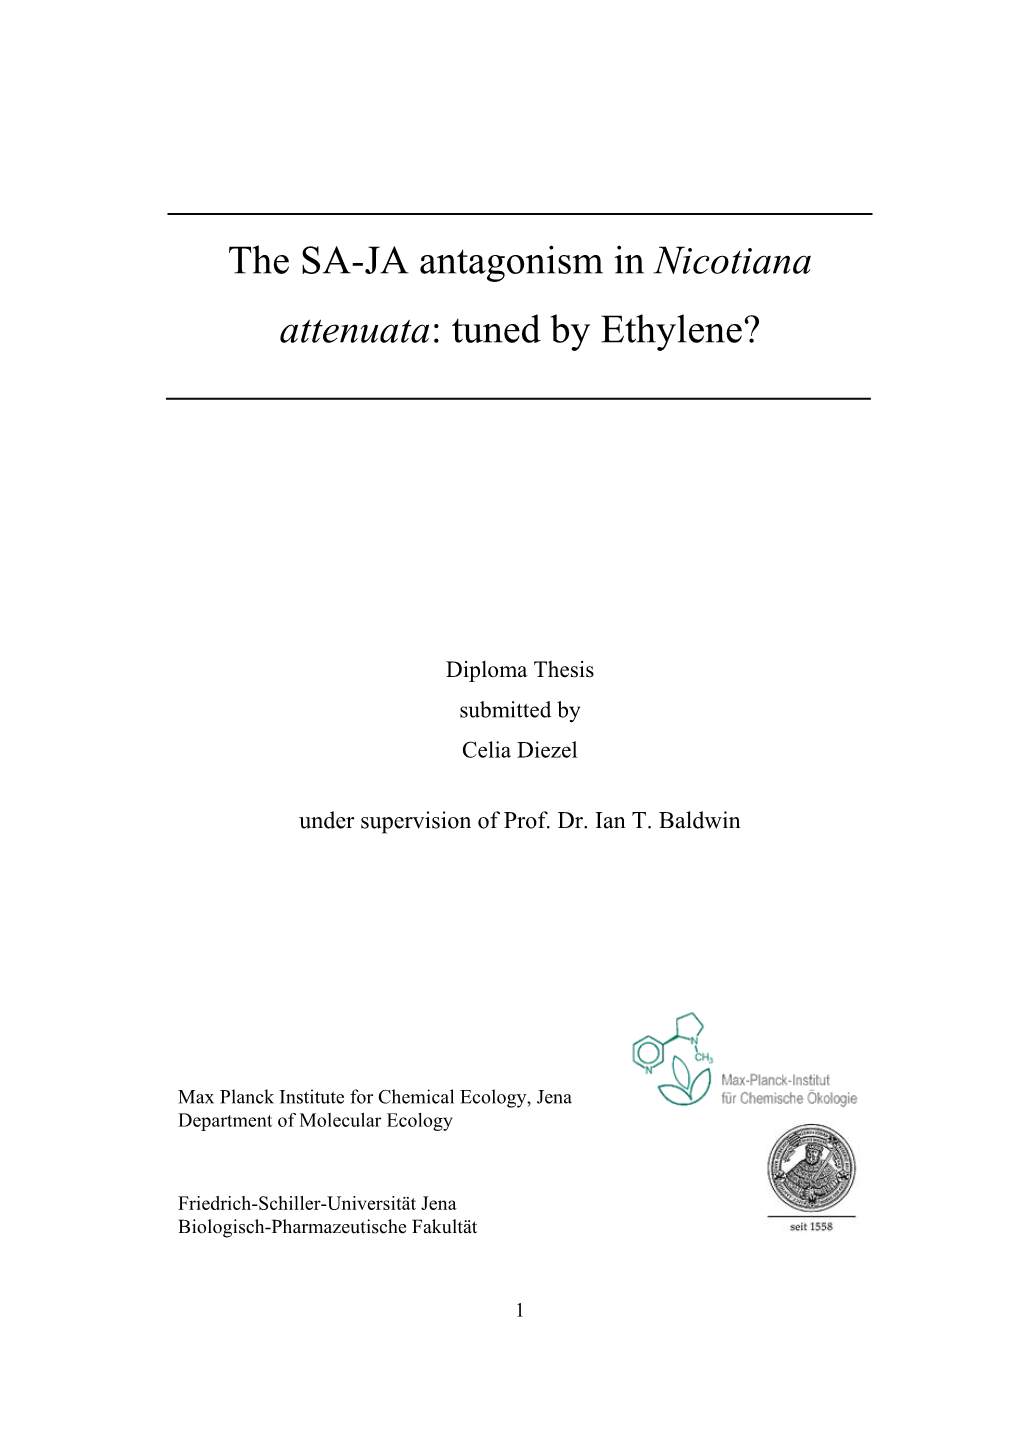 The SA-JA Antagonism in Nicotiana Attenuata: Tuned by Ethylene?